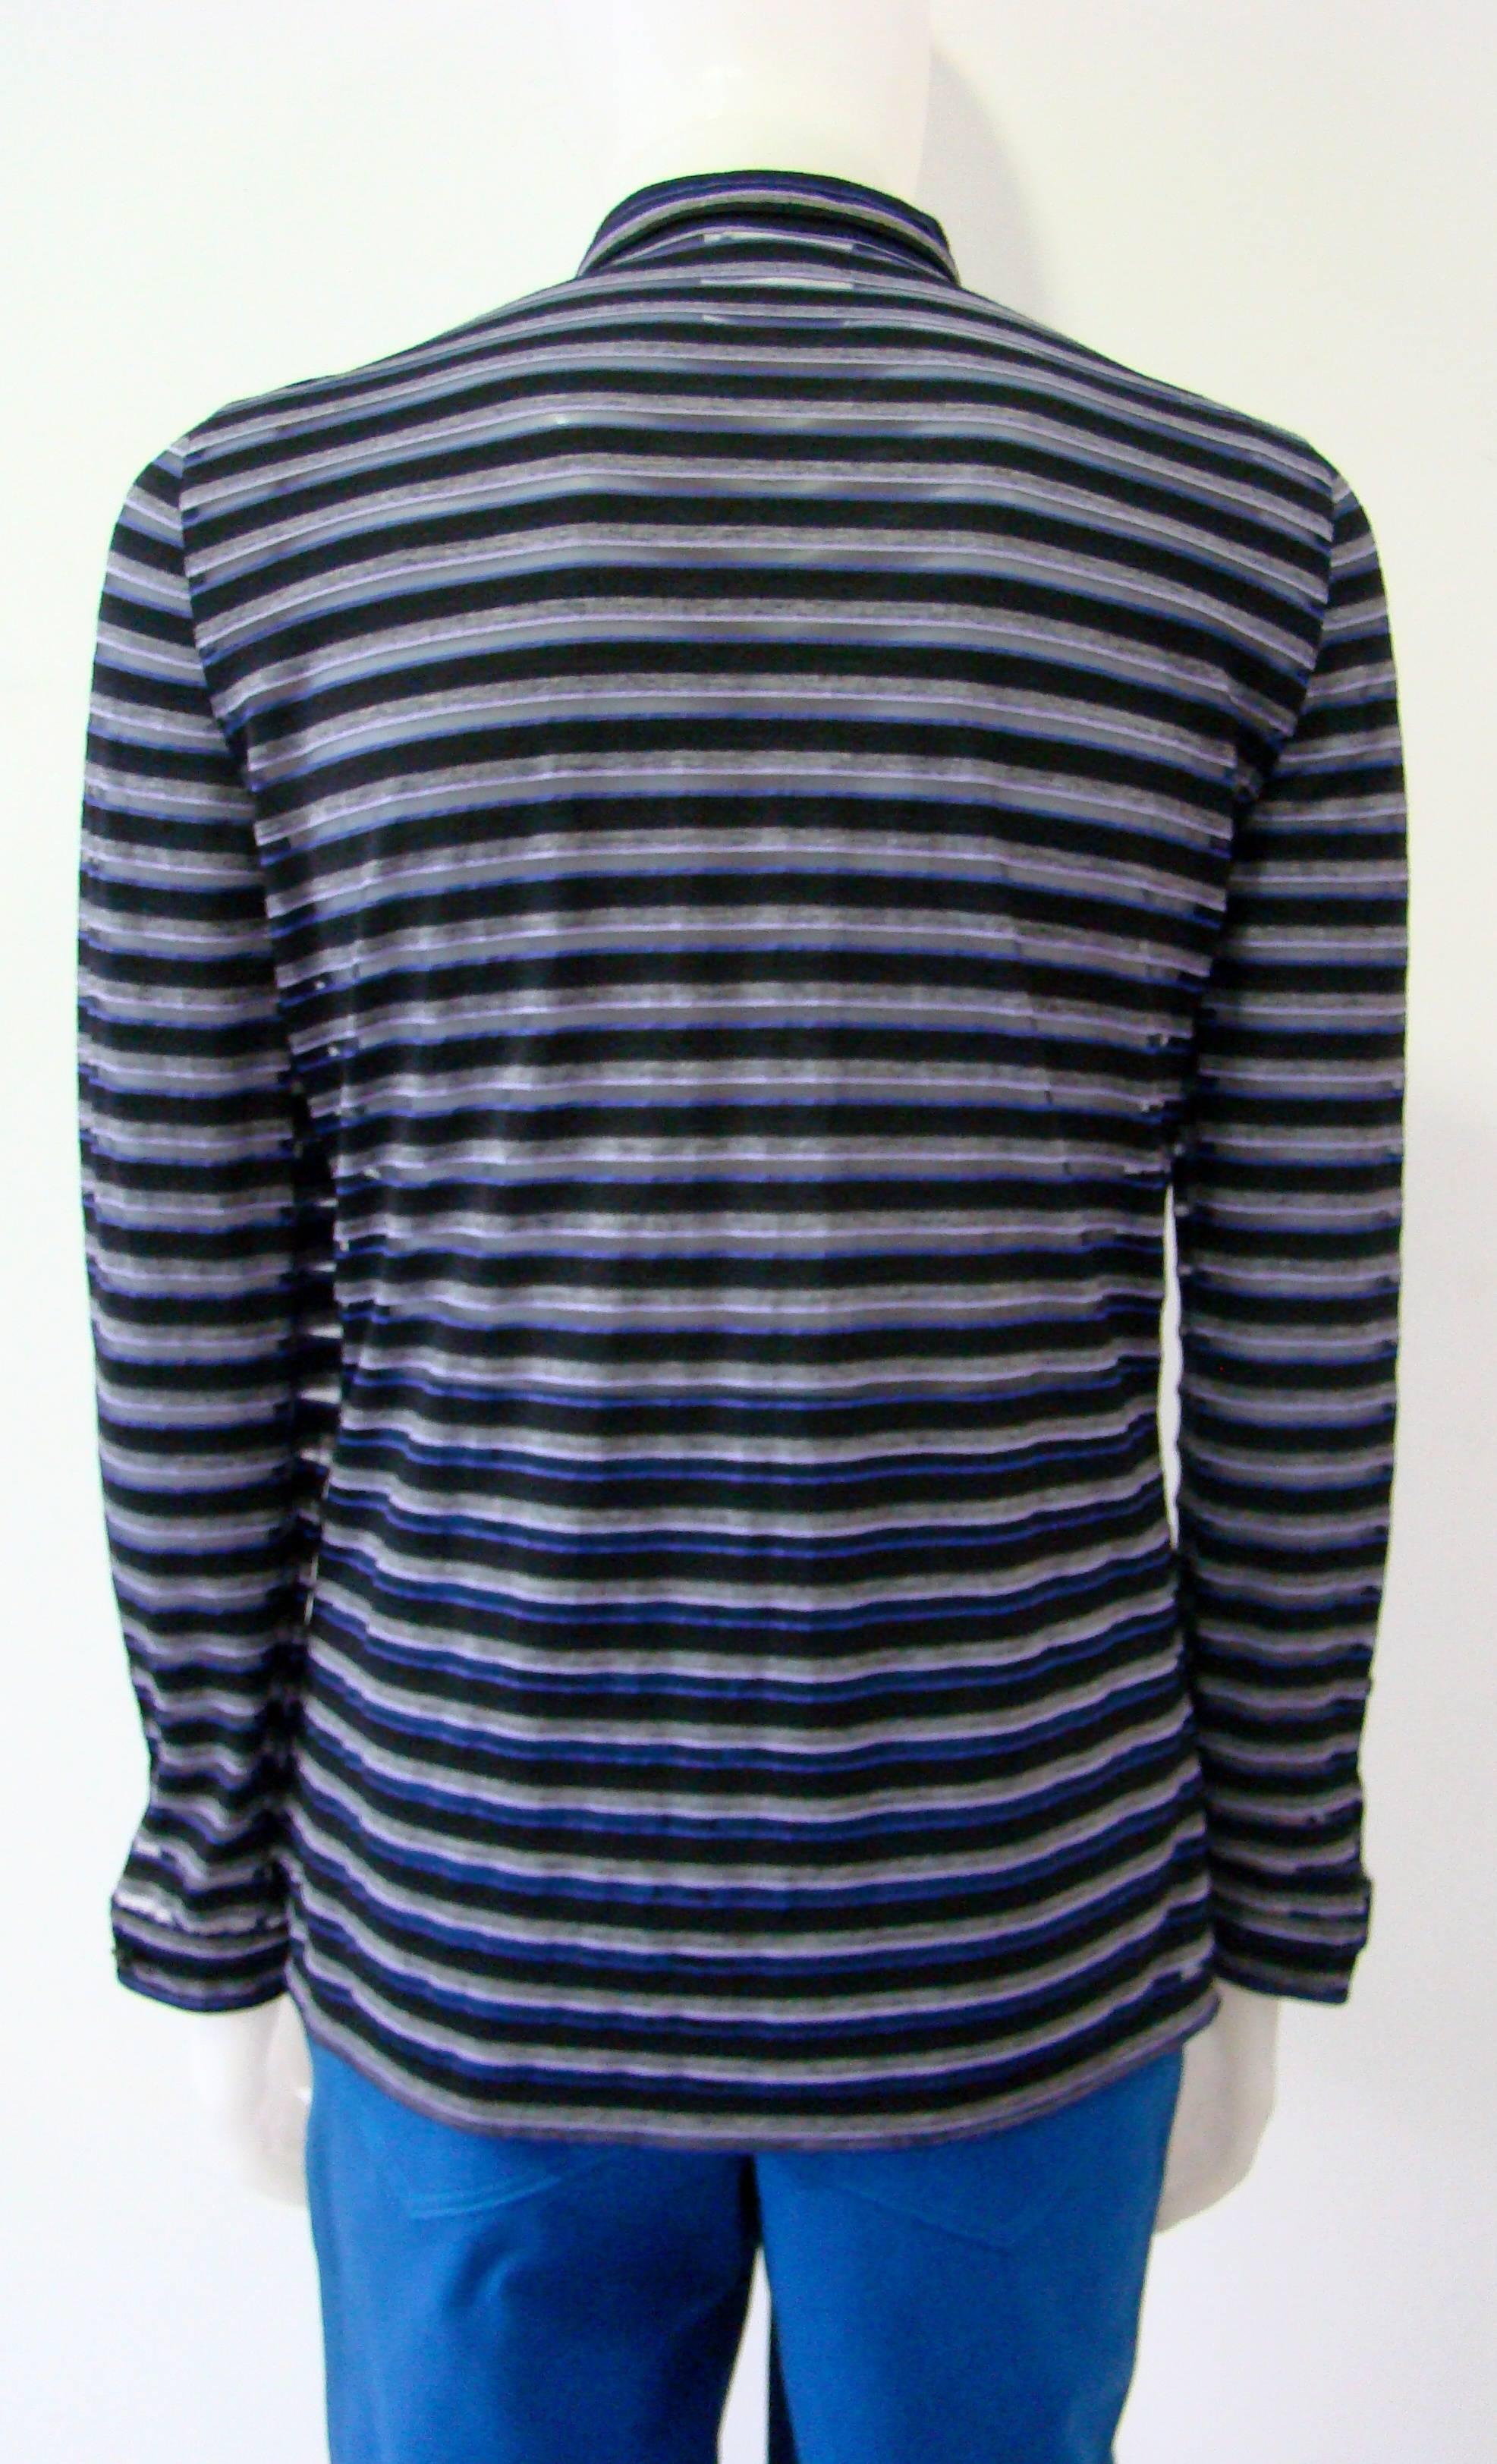 Gianni Versace Striped Sheer Shirt Fall 1997 In New Condition For Sale In Athens, Agia Paraskevi